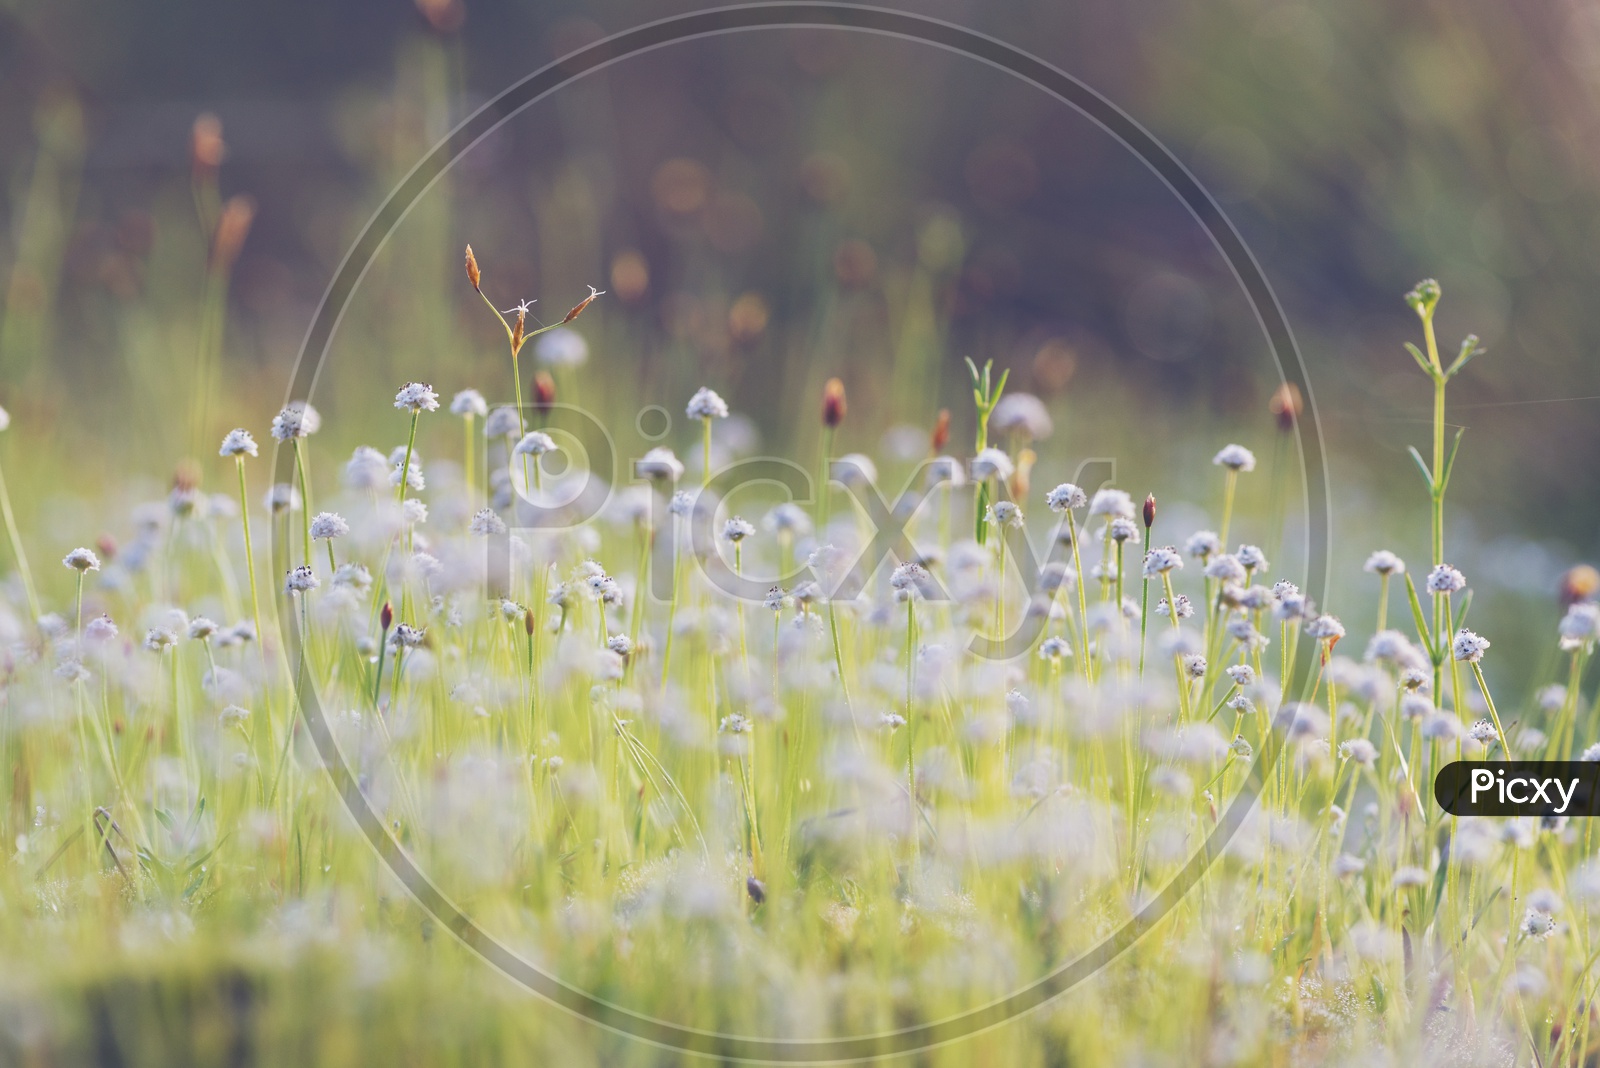 Tropical Grass Garden Flowers With Vintage Filter